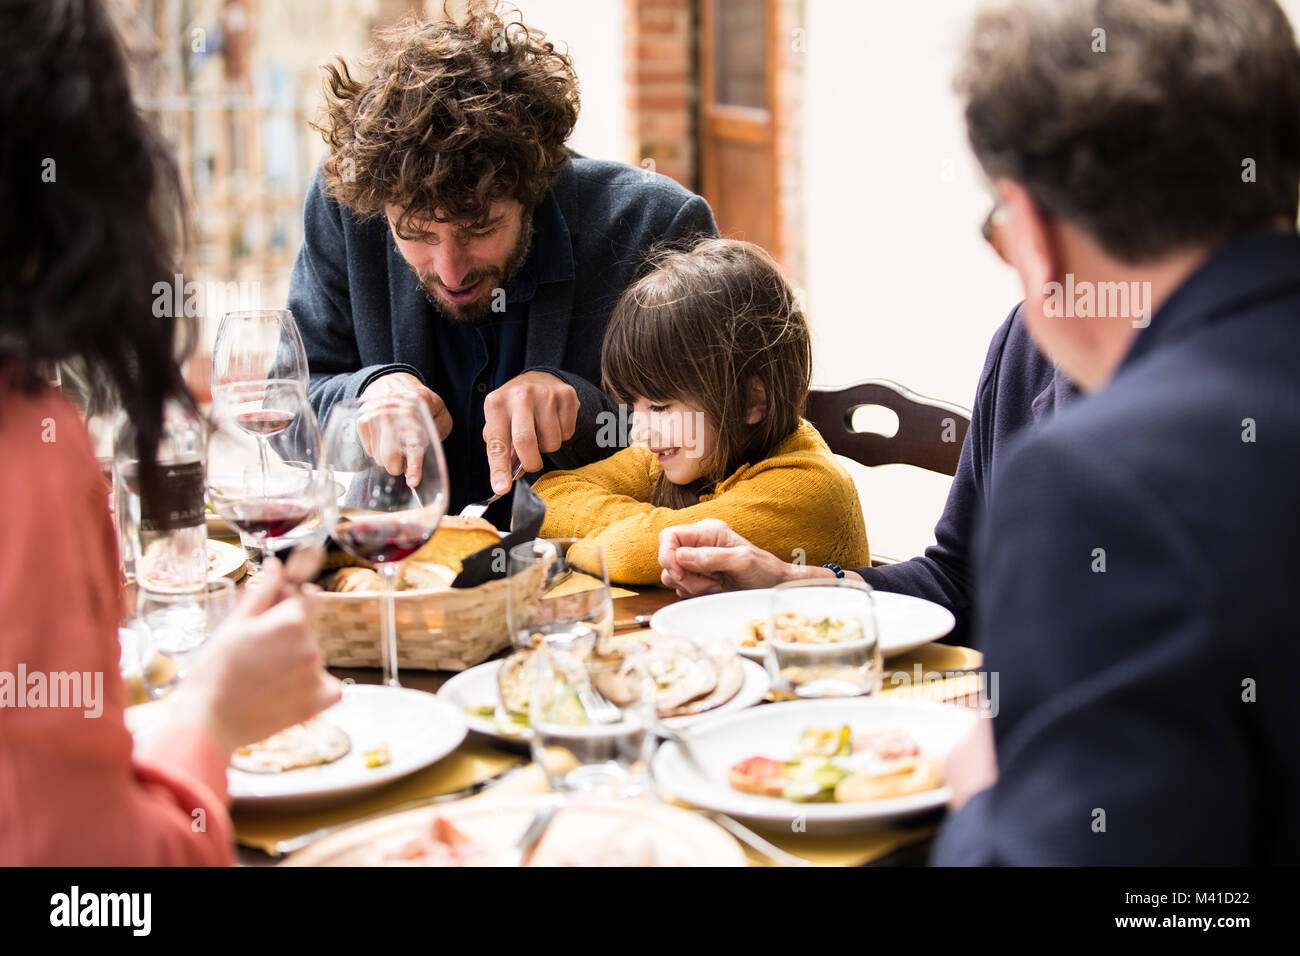 Father helping daughter cut her food Stock Photo